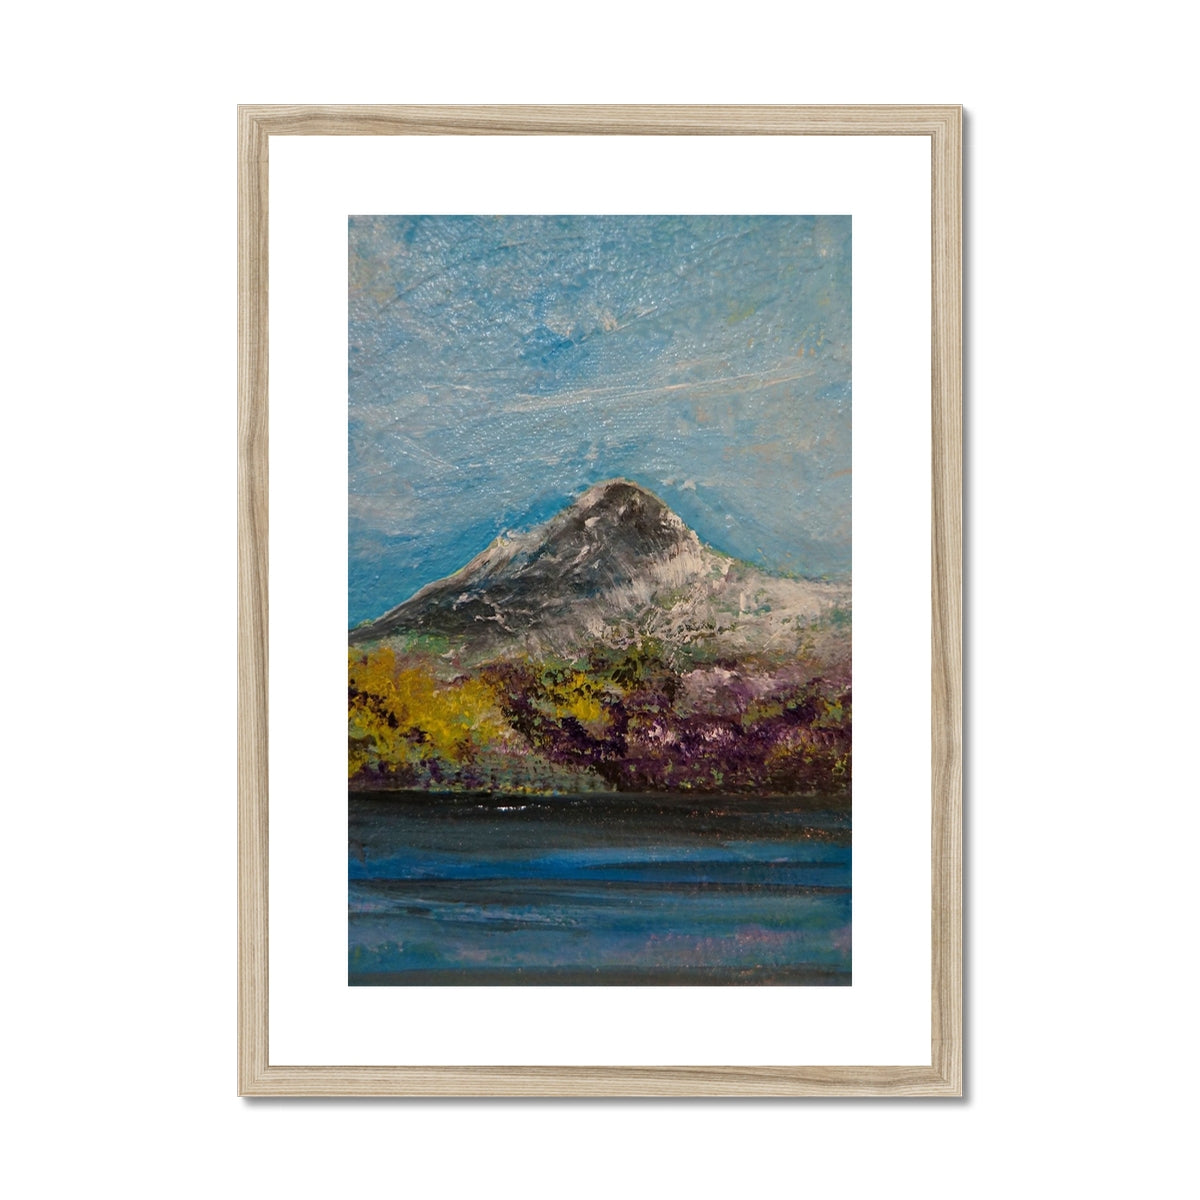 Ben Lomond ii Painting | Framed & Mounted Prints From Scotland-Framed & Mounted Prints-Scottish Lochs & Mountains Art Gallery-A2 Portrait-Natural Frame-Paintings, Prints, Homeware, Art Gifts From Scotland By Scottish Artist Kevin Hunter